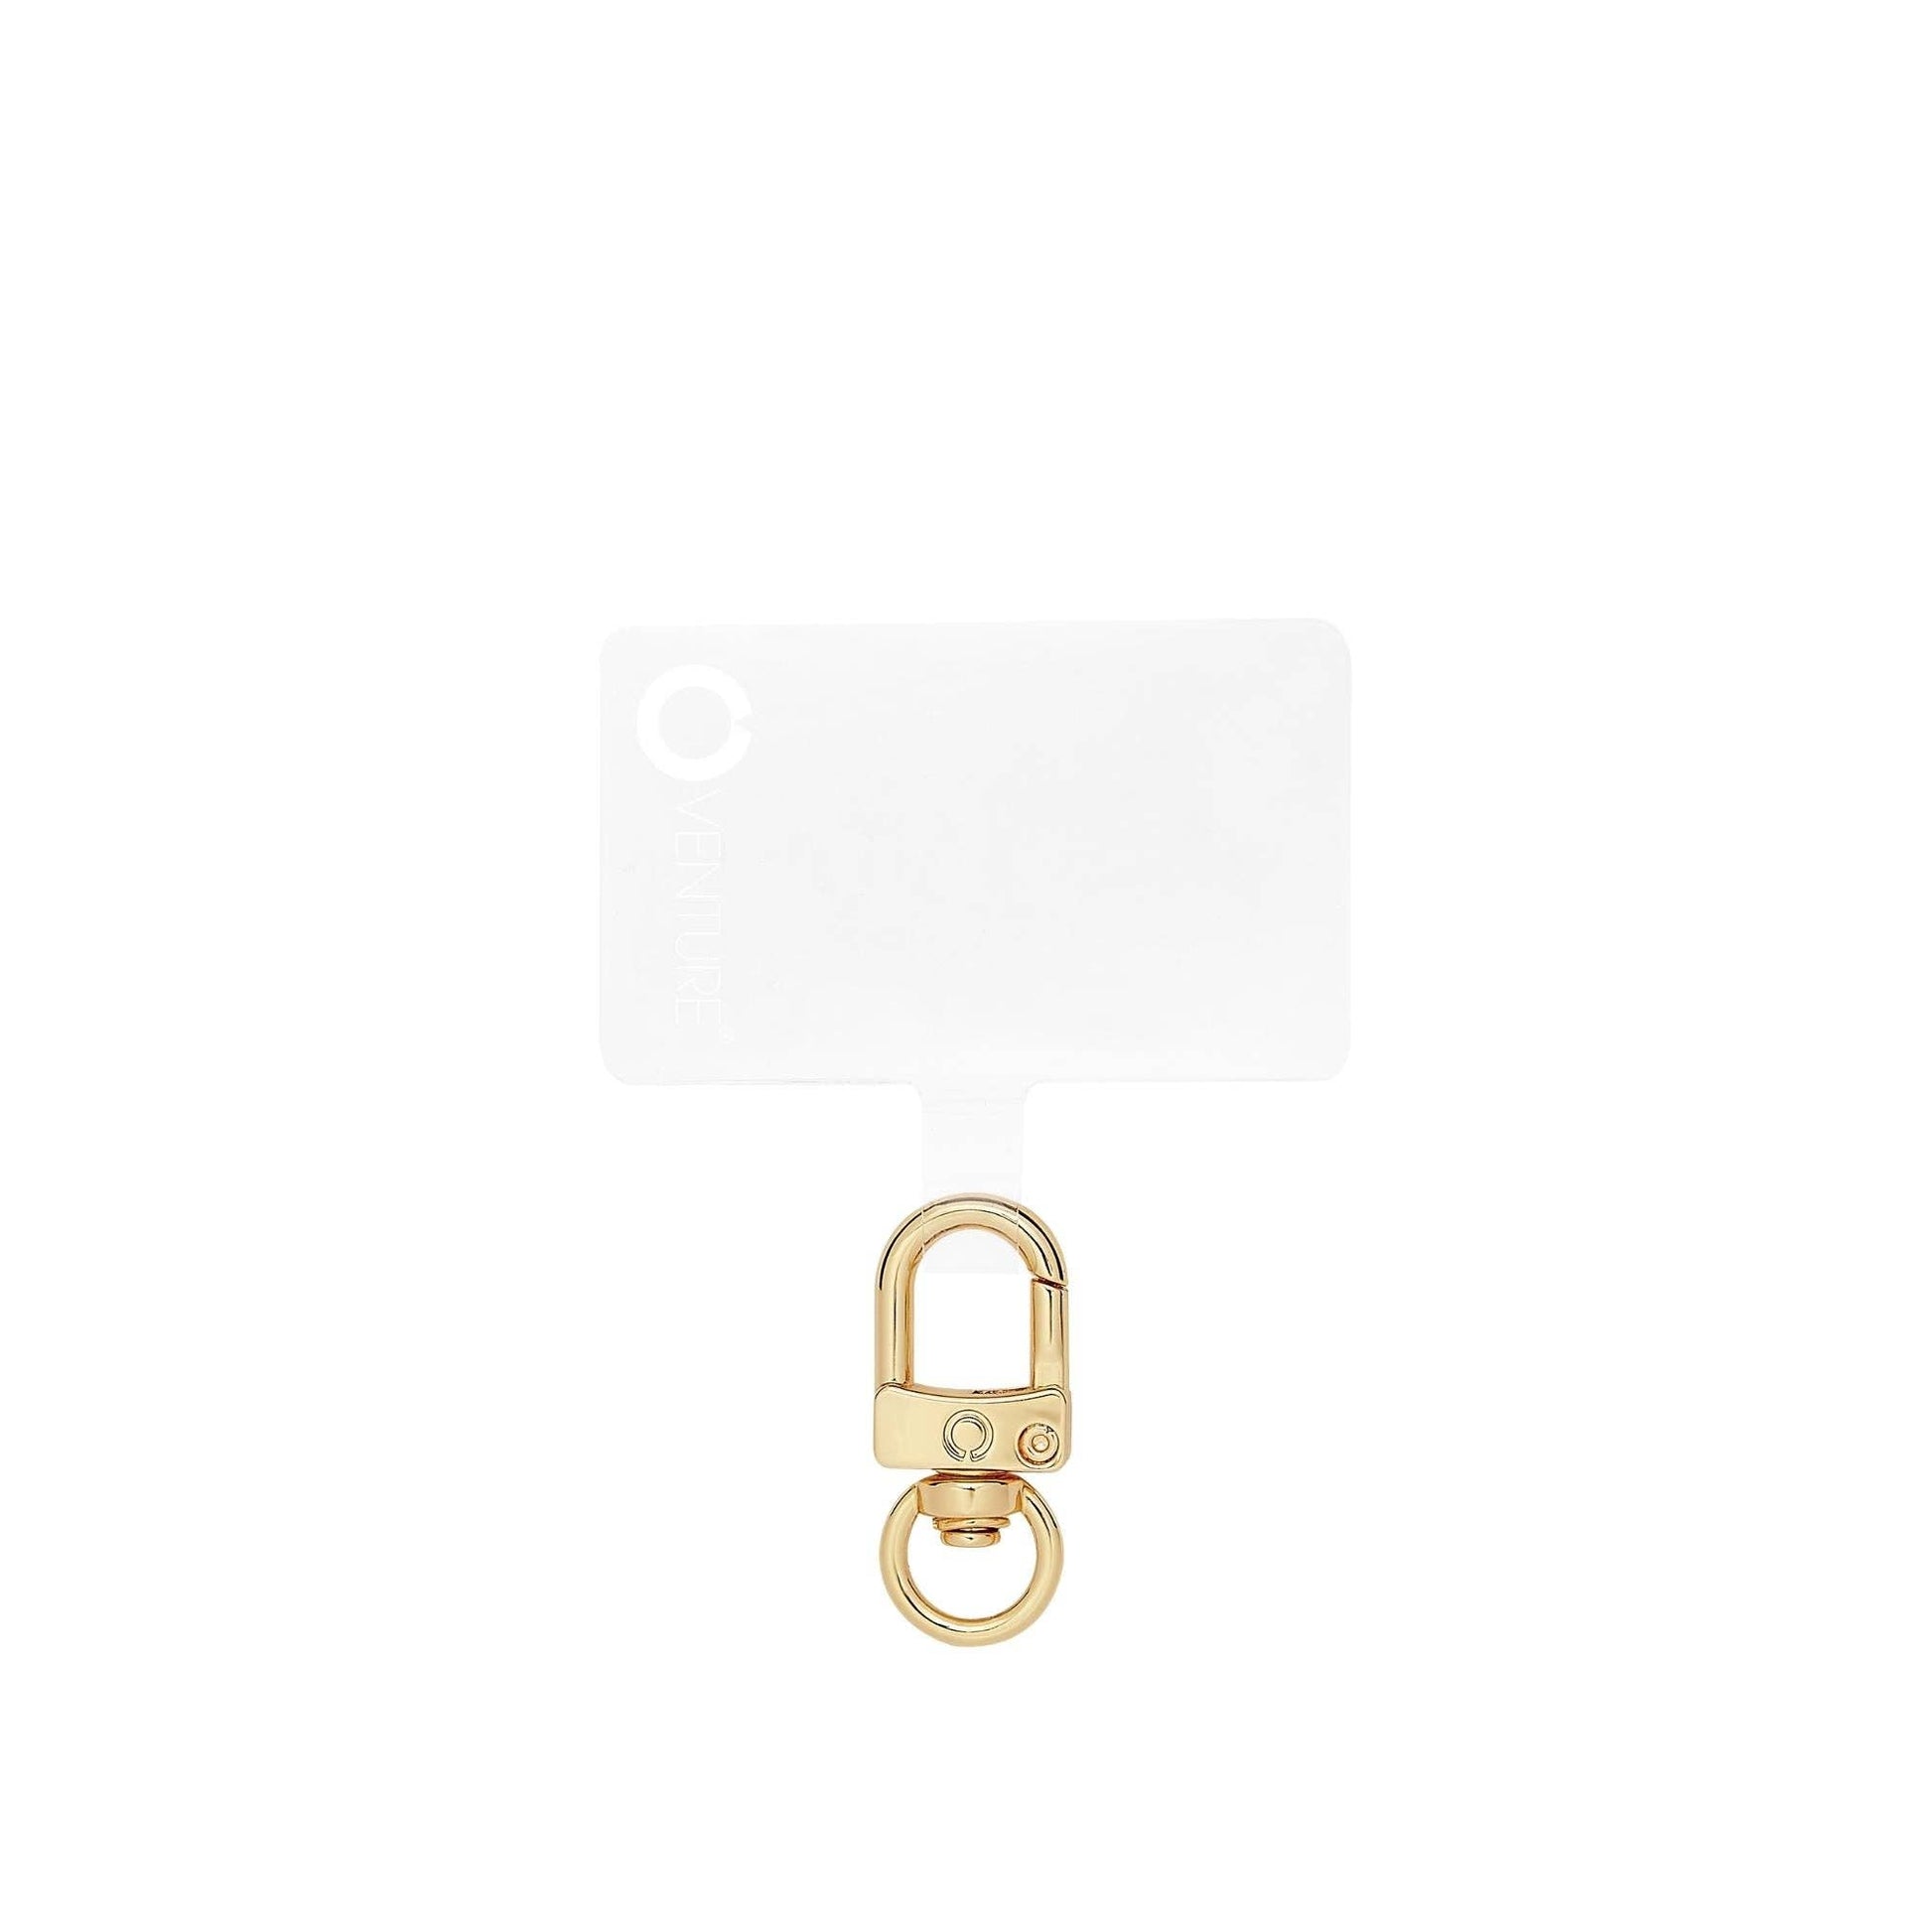 The Hook Me Up™ Universal Phone Connector in Gold